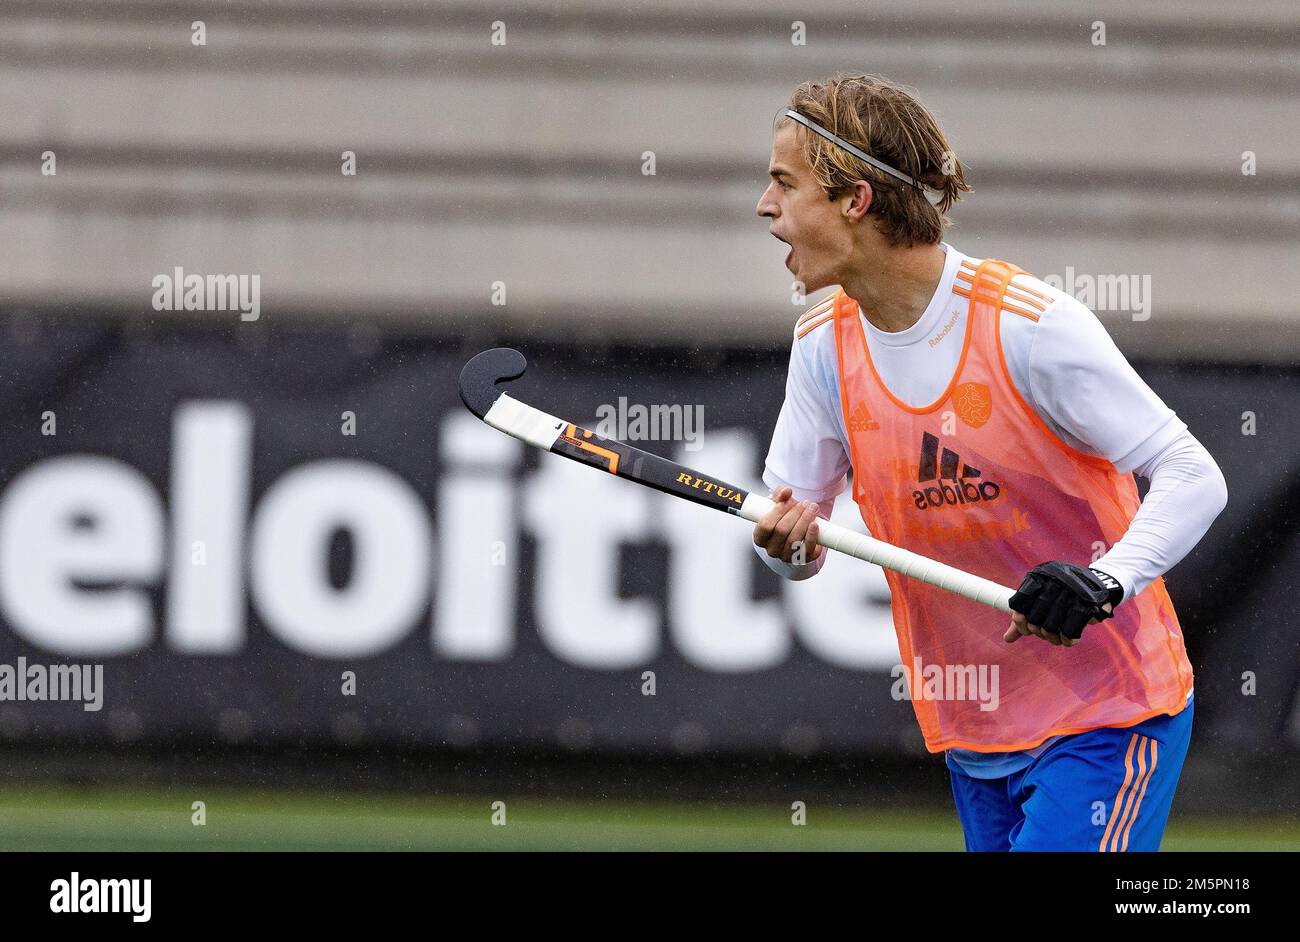 ROTTERDAM - Justen Blok of the Dutch men's hockey team during training  leading up to the World Cup. ANP IRIS VAN DEN BROEK netherlands out -  belgium out Stock Photo - Alamy